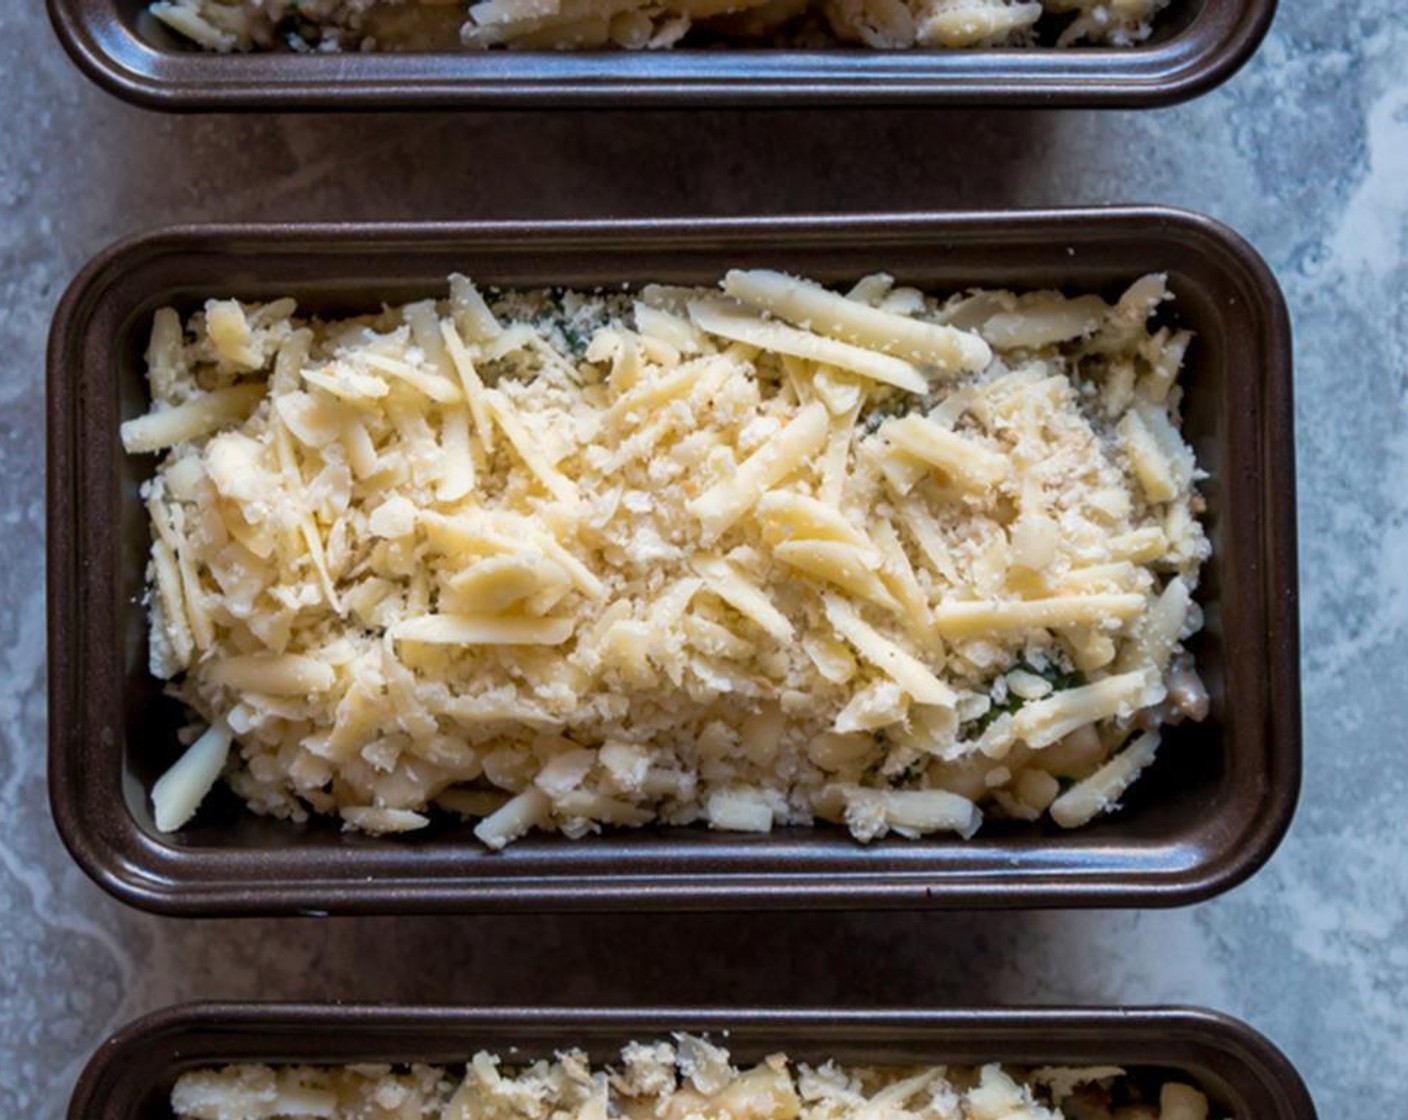 step 6 In a small bowl, mix together the Breadcrumbs (3 Tbsp) and remaining Mature Cheddar Cheese (1/3 cup). Sprinkle over the kefta and kale mac and cheese.